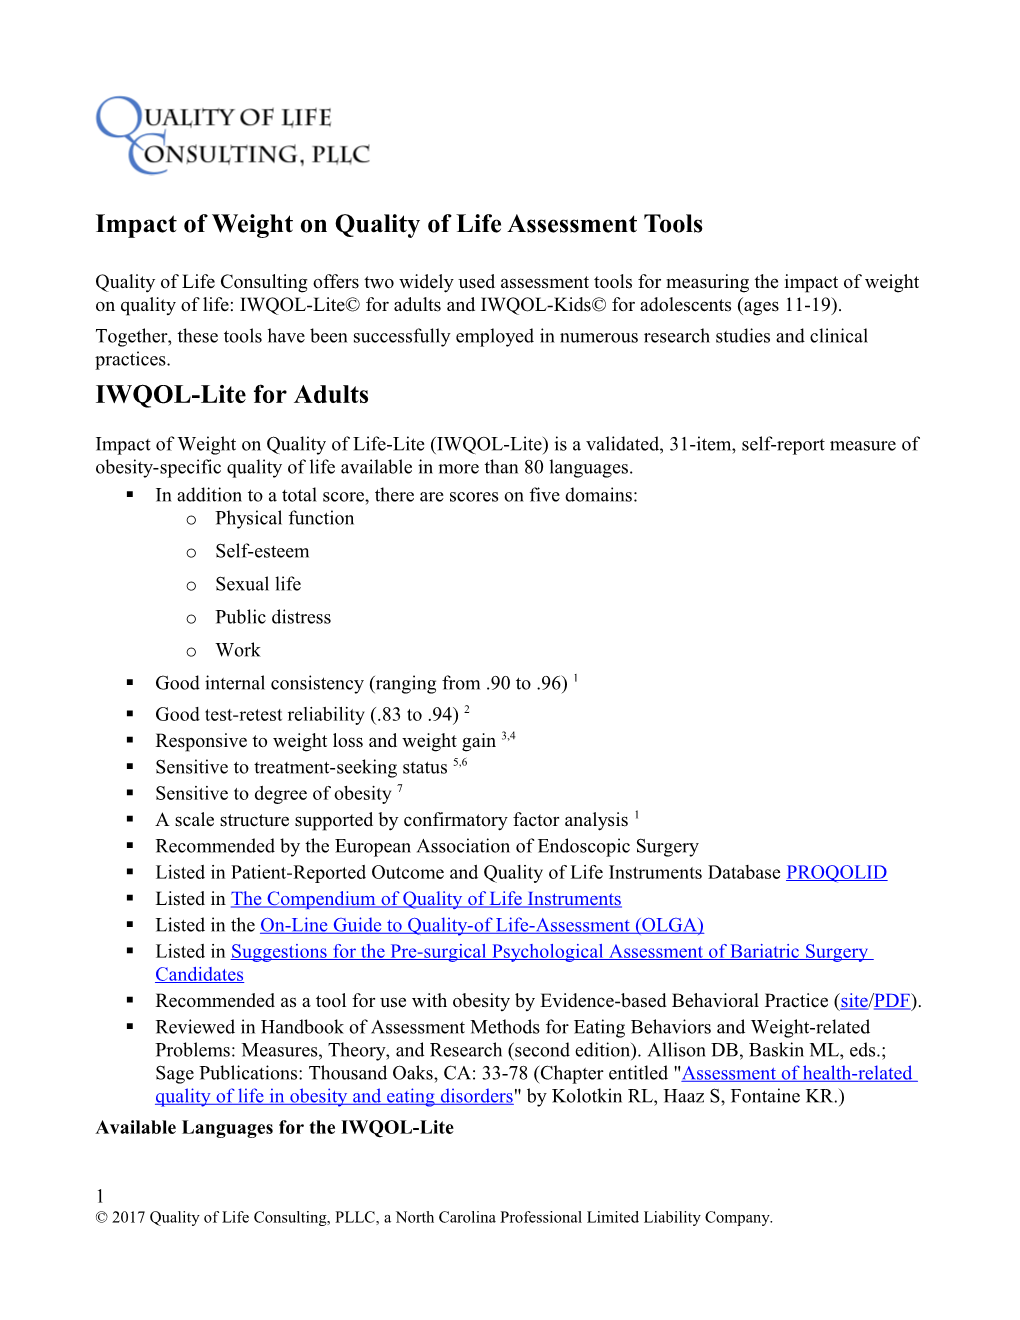 Impact of Weight on Quality of Life Assessment Tools